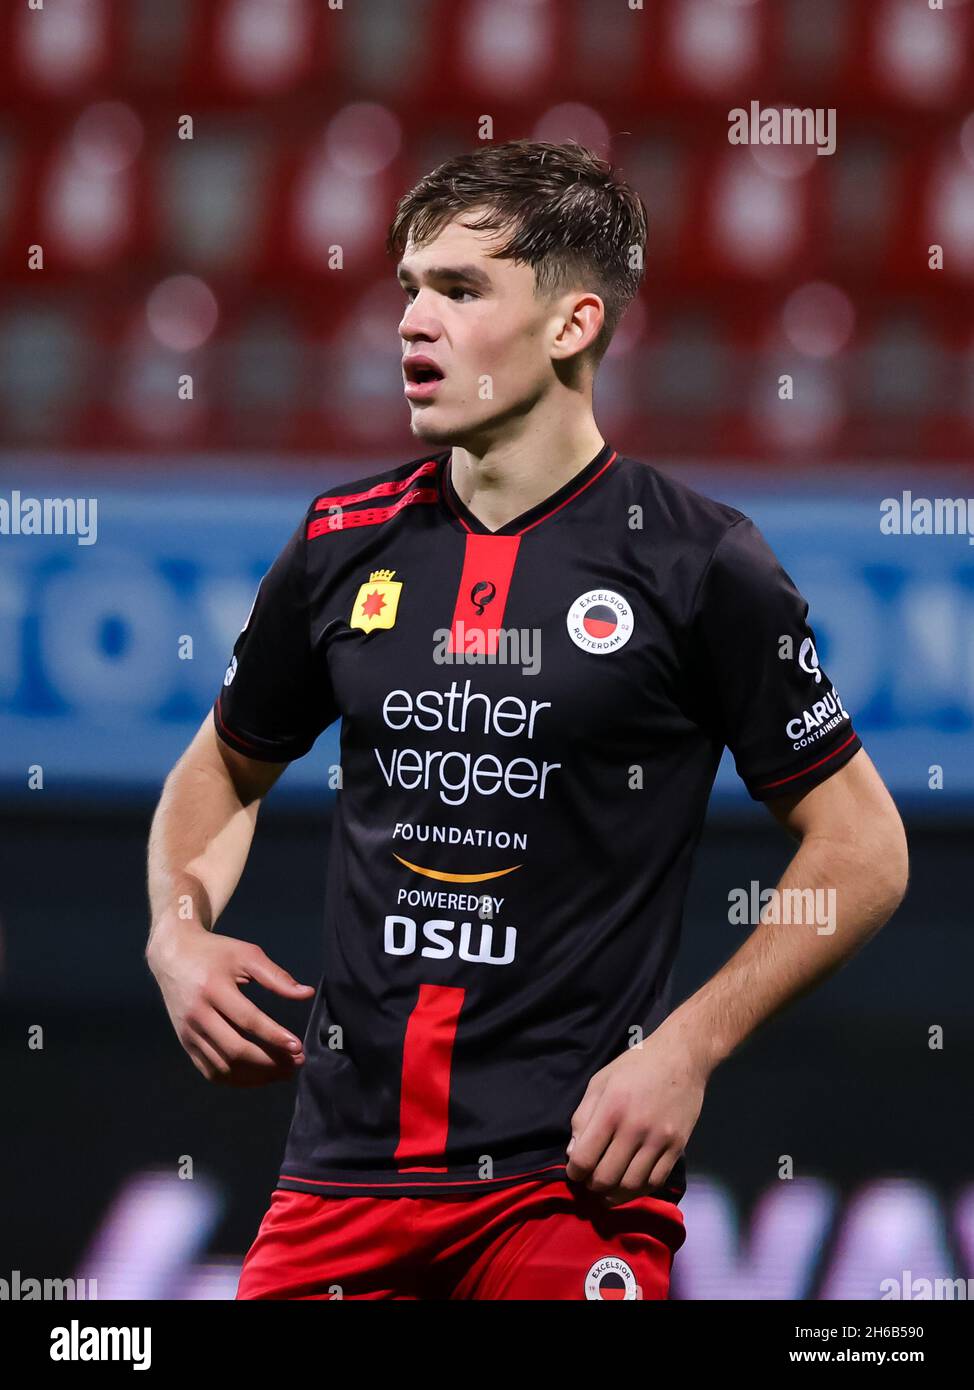 ROTTERDAM, NETHERLANDS - NOVEMBER 14: Thijs Dallinga of Excelsior Rotterdam during the Dutch Keukenkampioendivisie match between Excelsior and Almere City FC at the Van Donge & De Roo Stadion on November 14, 2021 in Rotterdam, Netherlands (Photo by Herman Dingler/Orange Pictures) Stock Photo